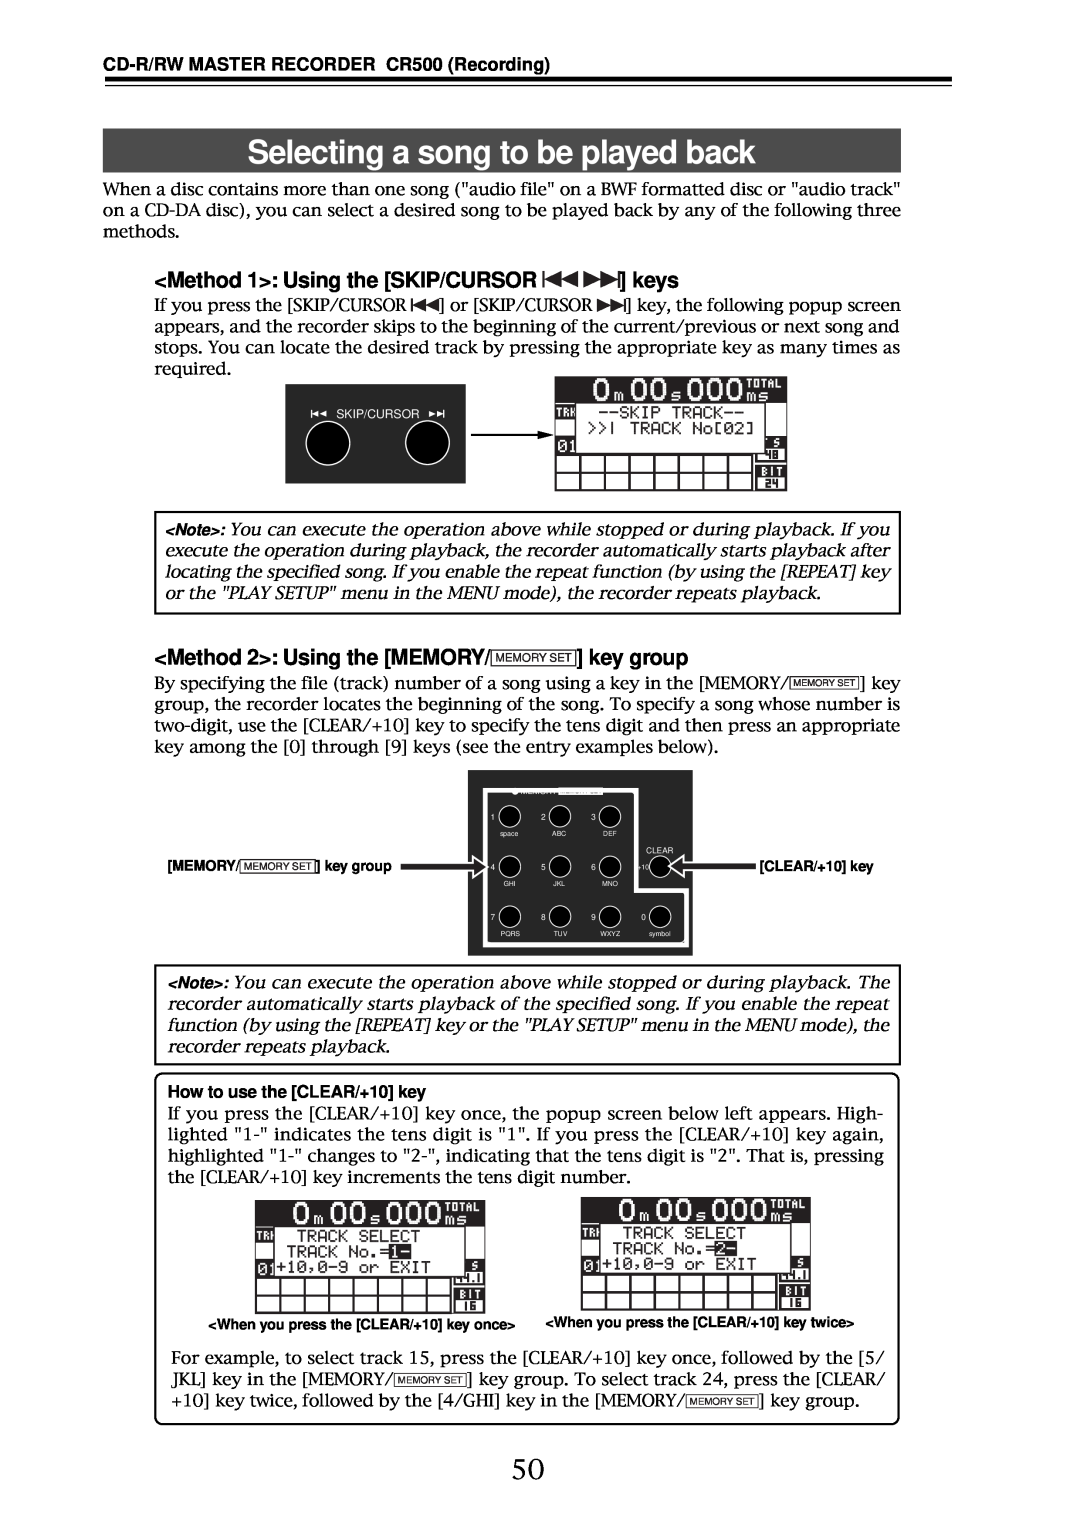 Fostex CR500 owner manual Selecting a song to be played back, <Method 1>: Using the SKIP/CURSOR keys, key group 